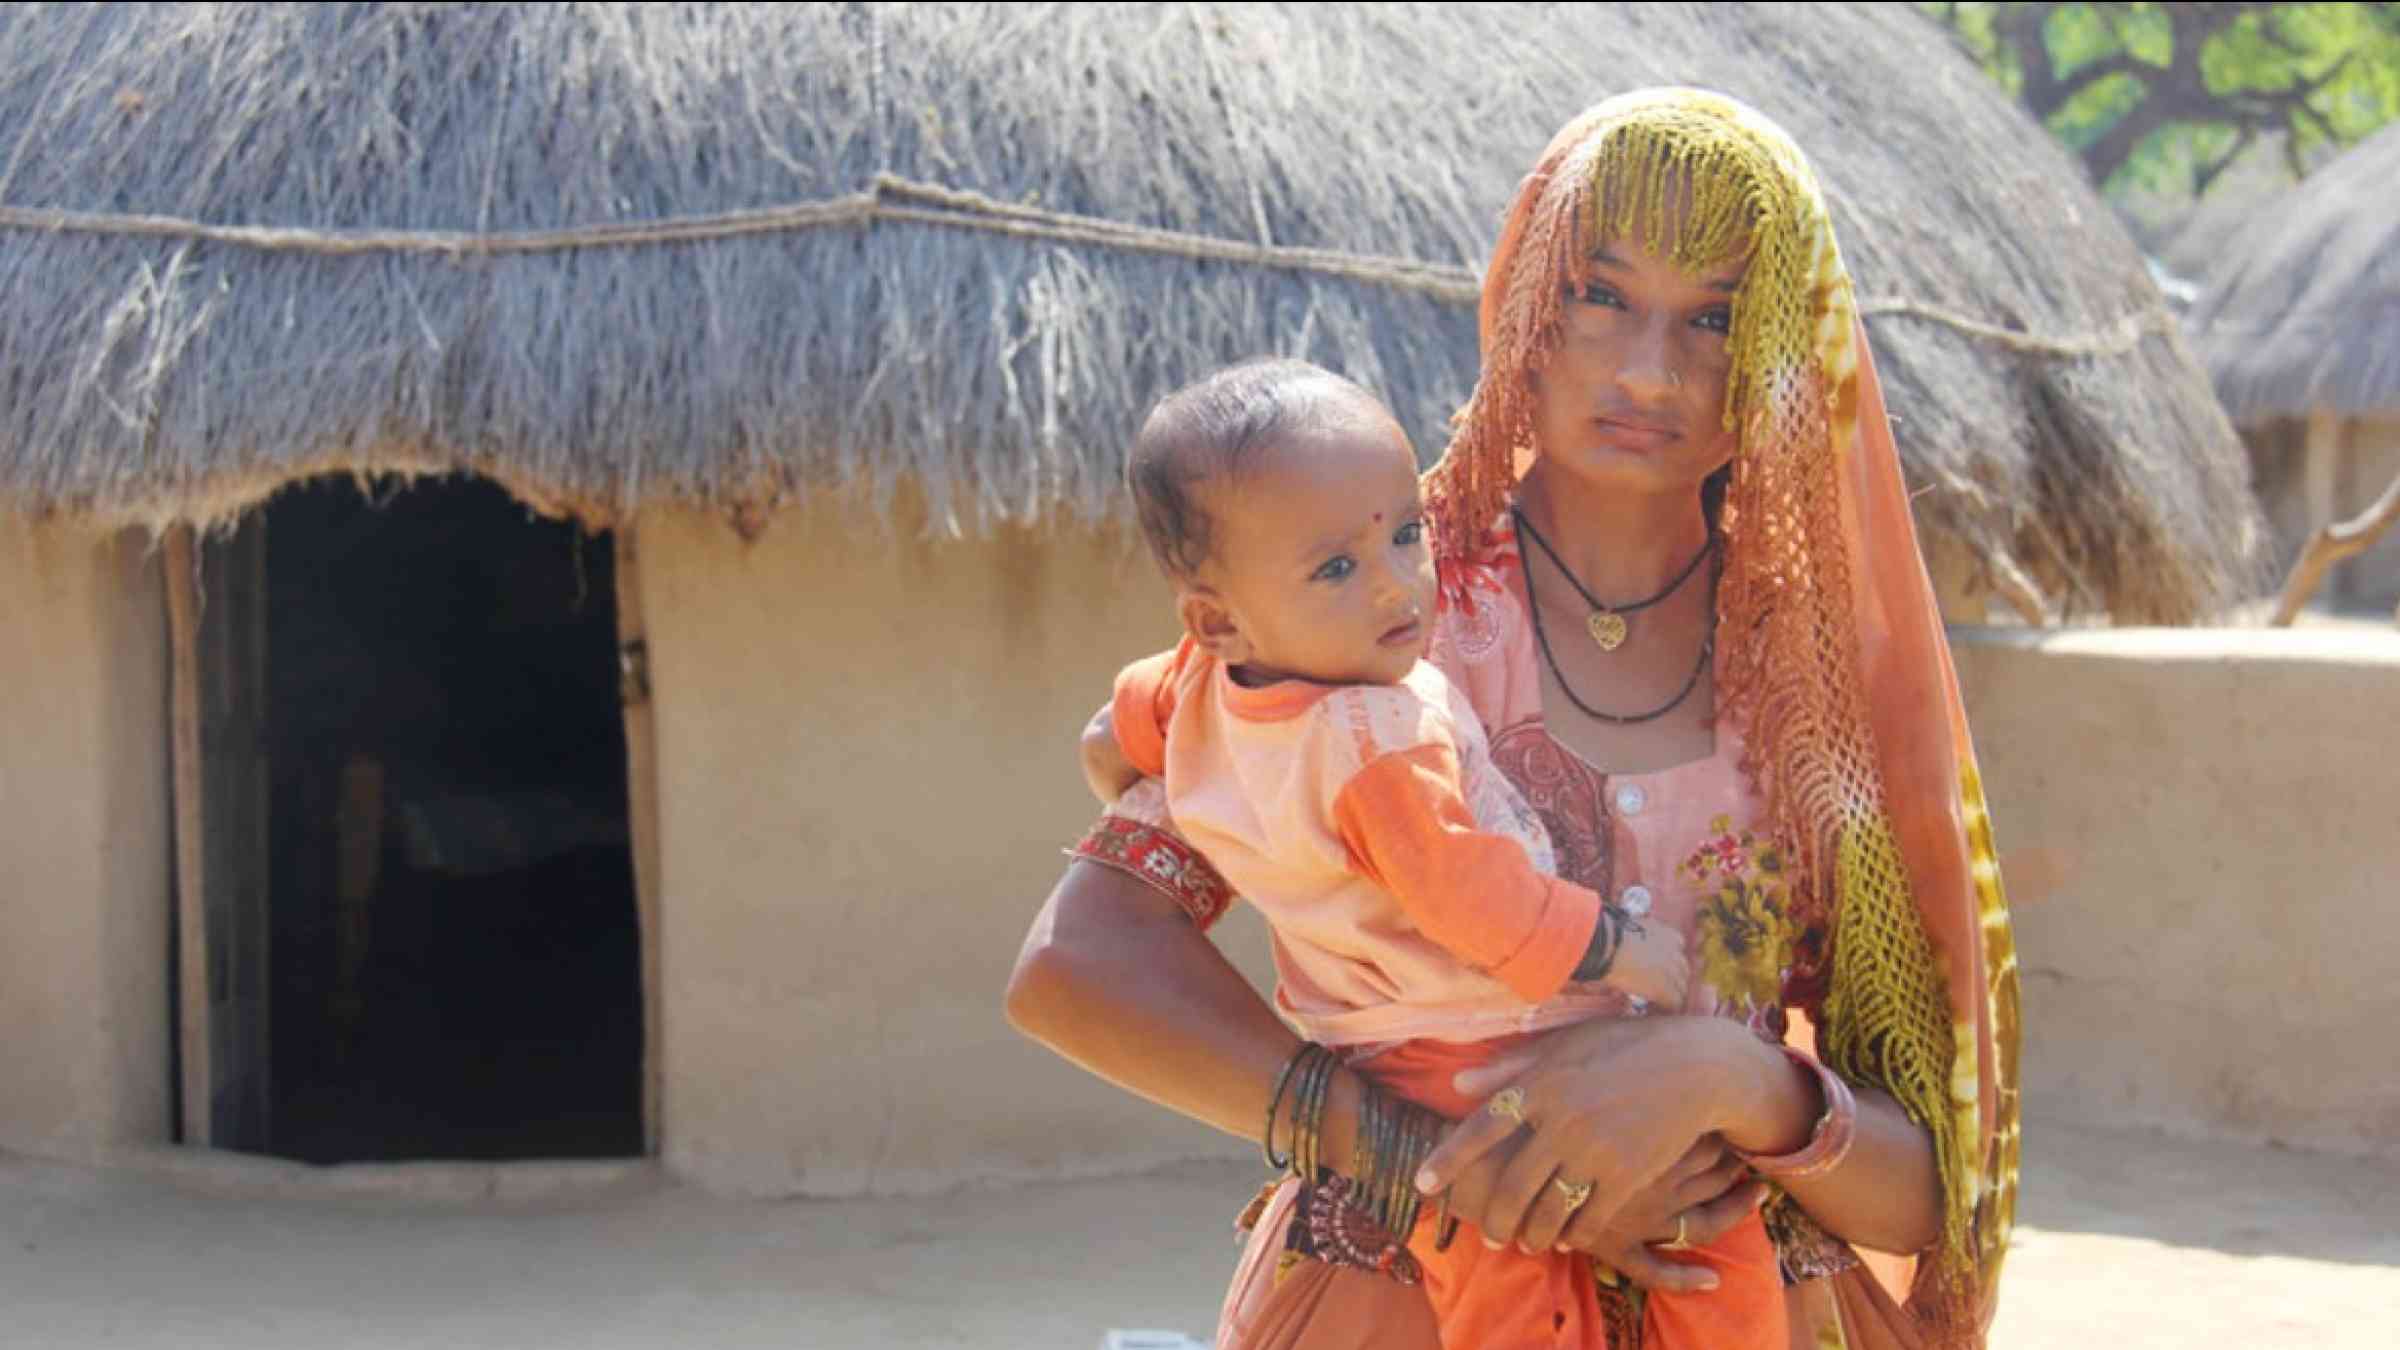 A mother-of-four from the Aban Jotar village, Sindh, Pakistan cradles her toddler while her husband works in the nearby fields, 